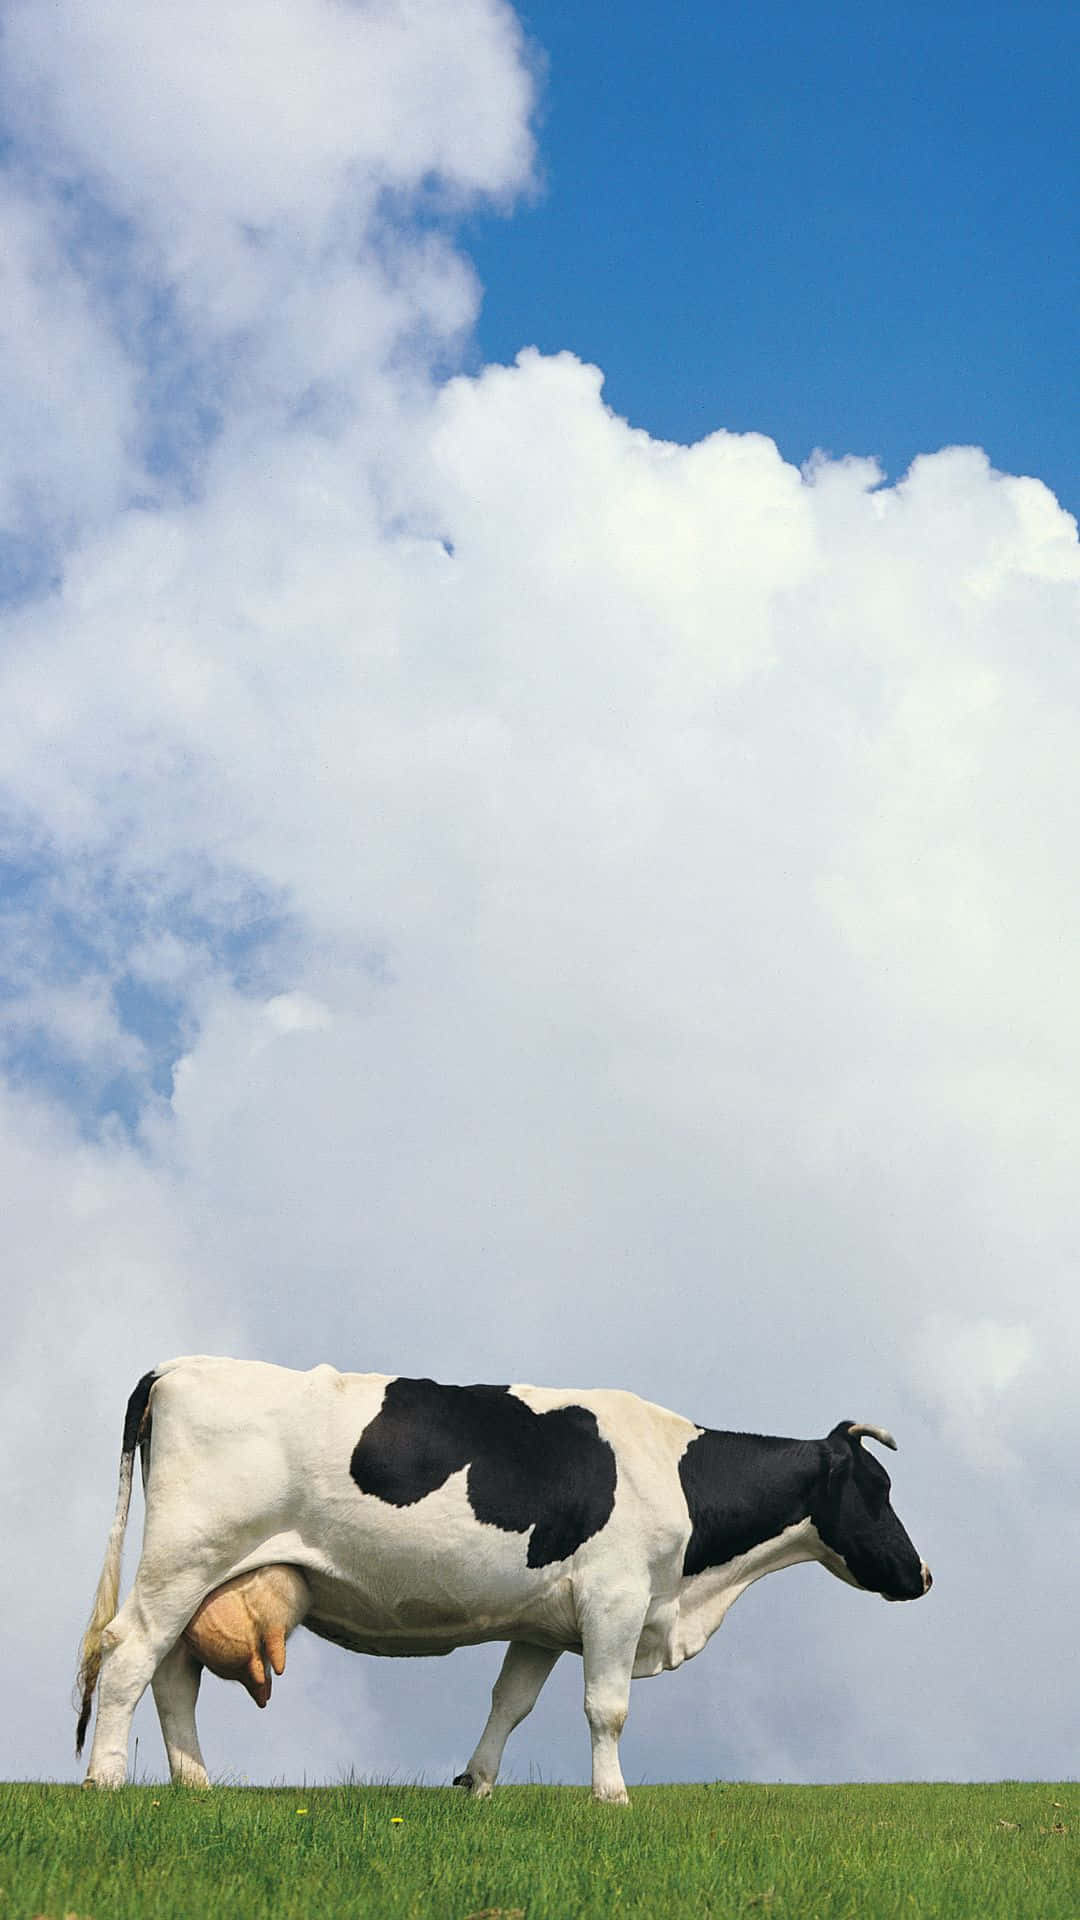 100+] Cow Iphone Wallpapers